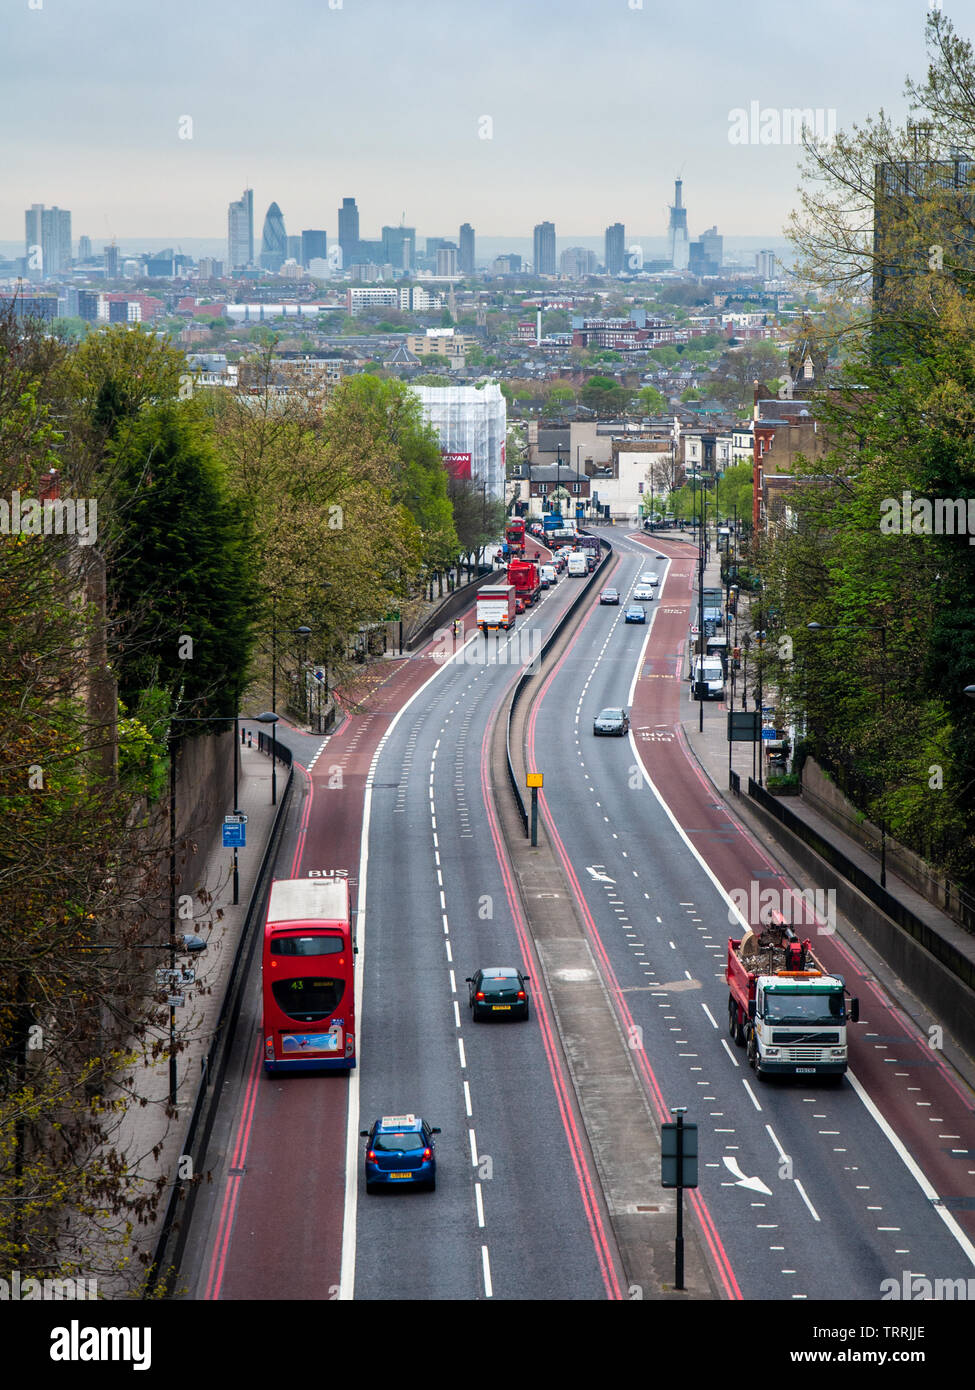 London, England, UK - April 13, 2011: Traffic flows along the Archway Road in the North London suburbs, with the skyline of the City of London busines Stock Photo